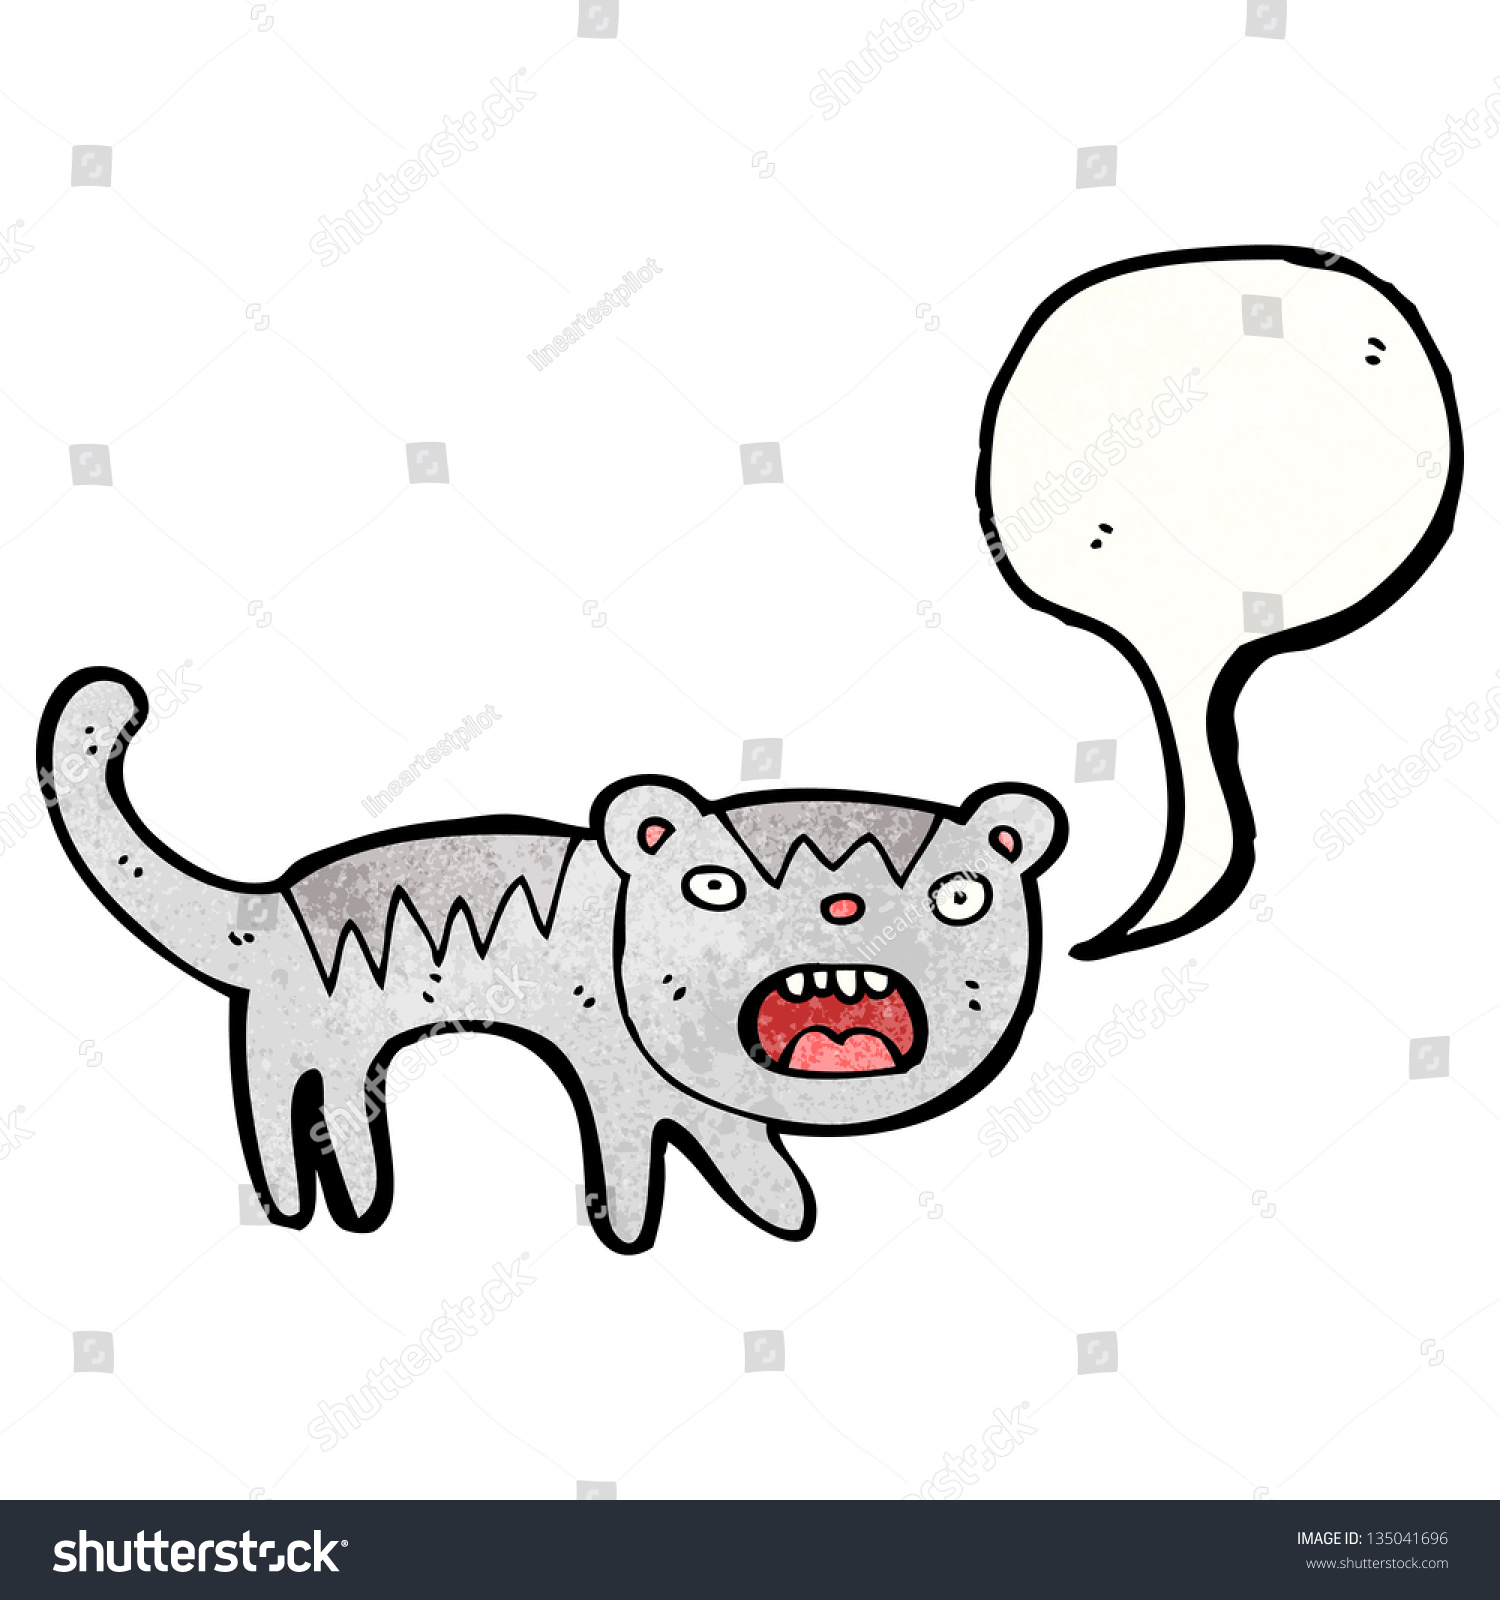 cat meowing clipart - photo #28